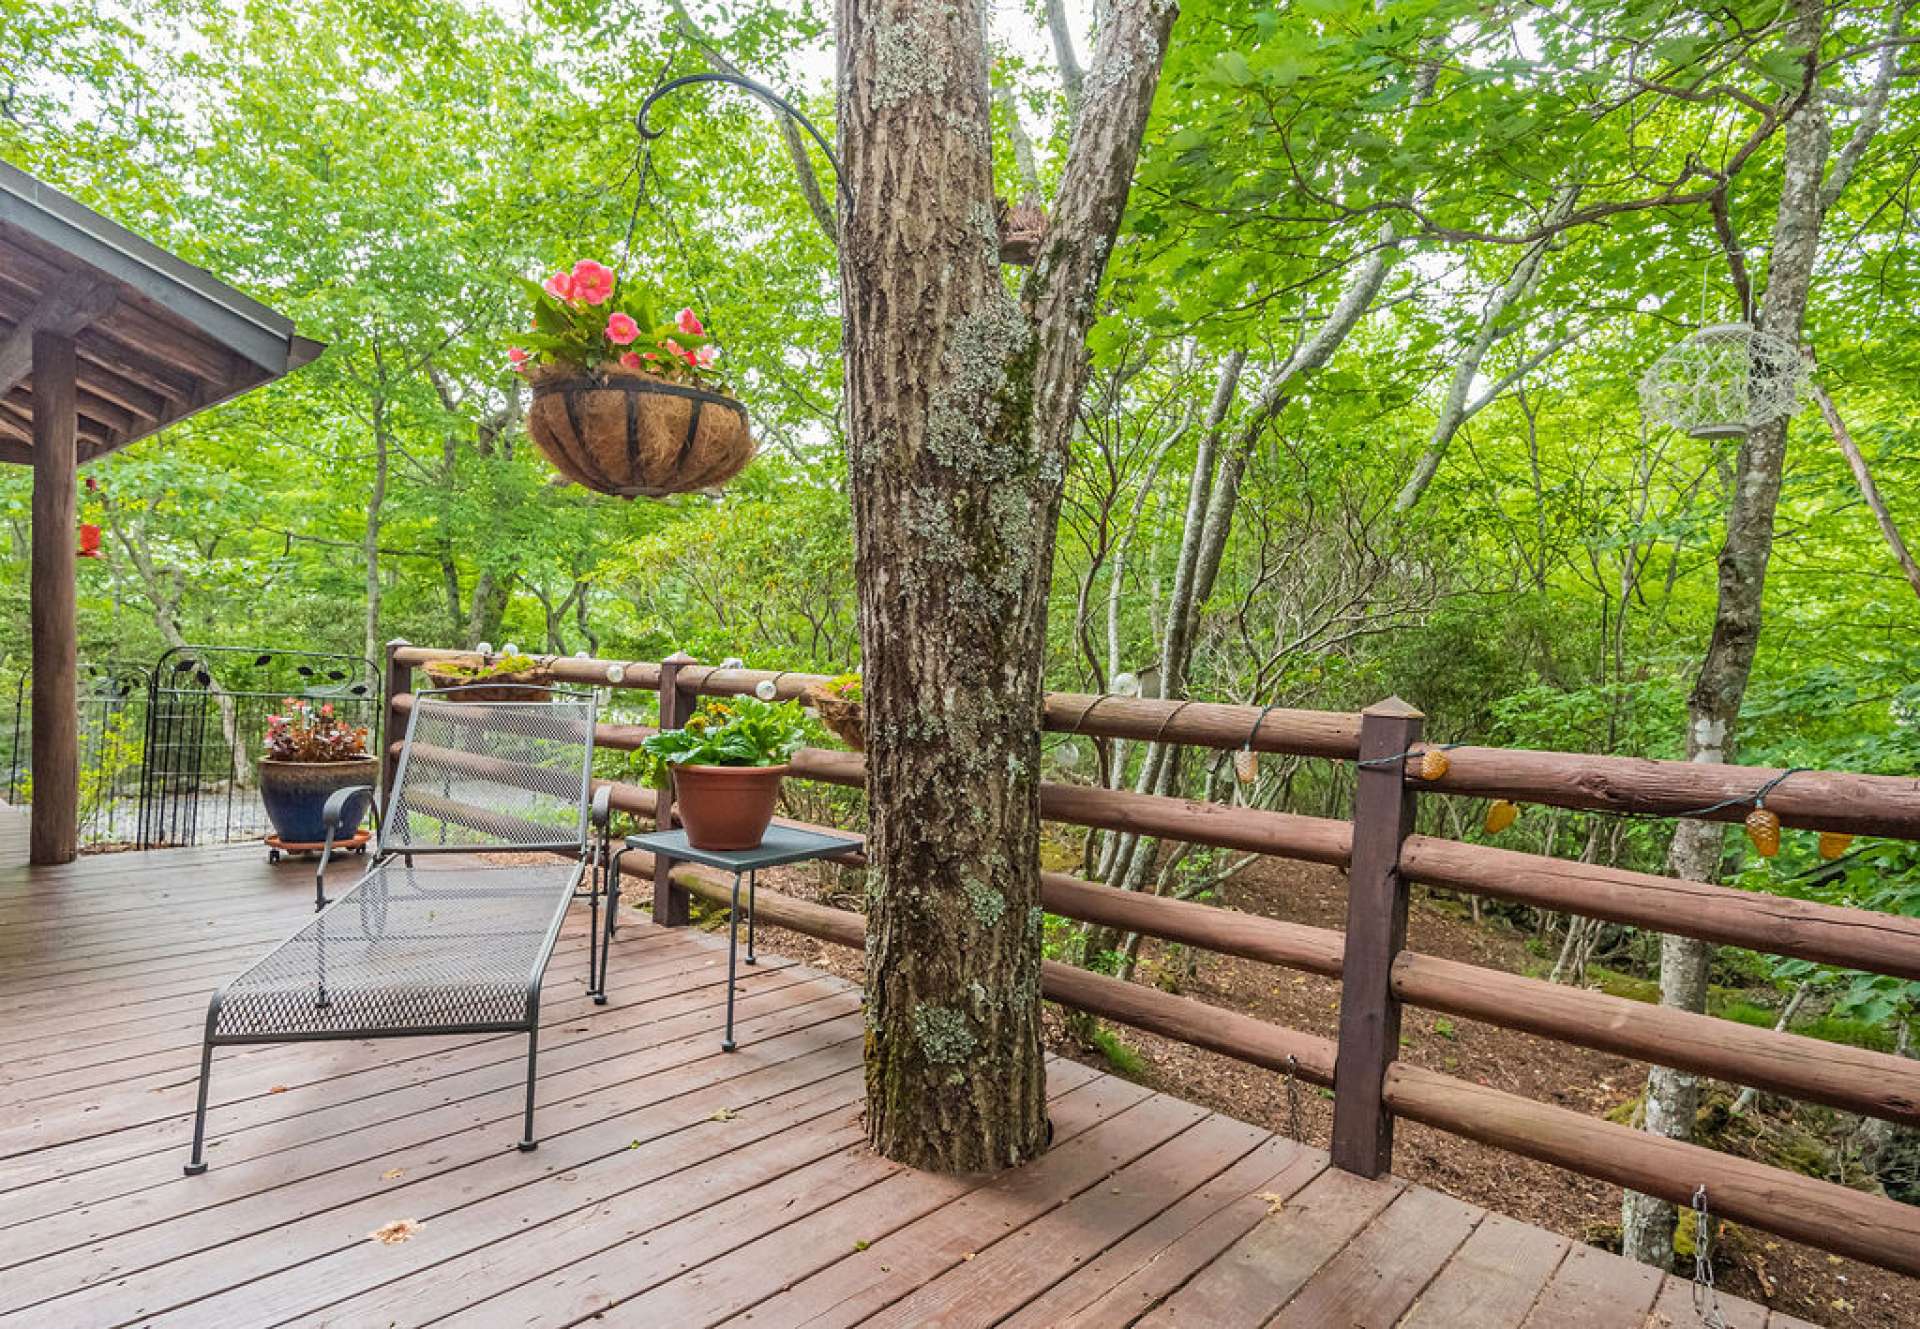 You'll never feel closer to nature than when you sit beside your very own deck tree. He's a great listener! #mountaintherapy